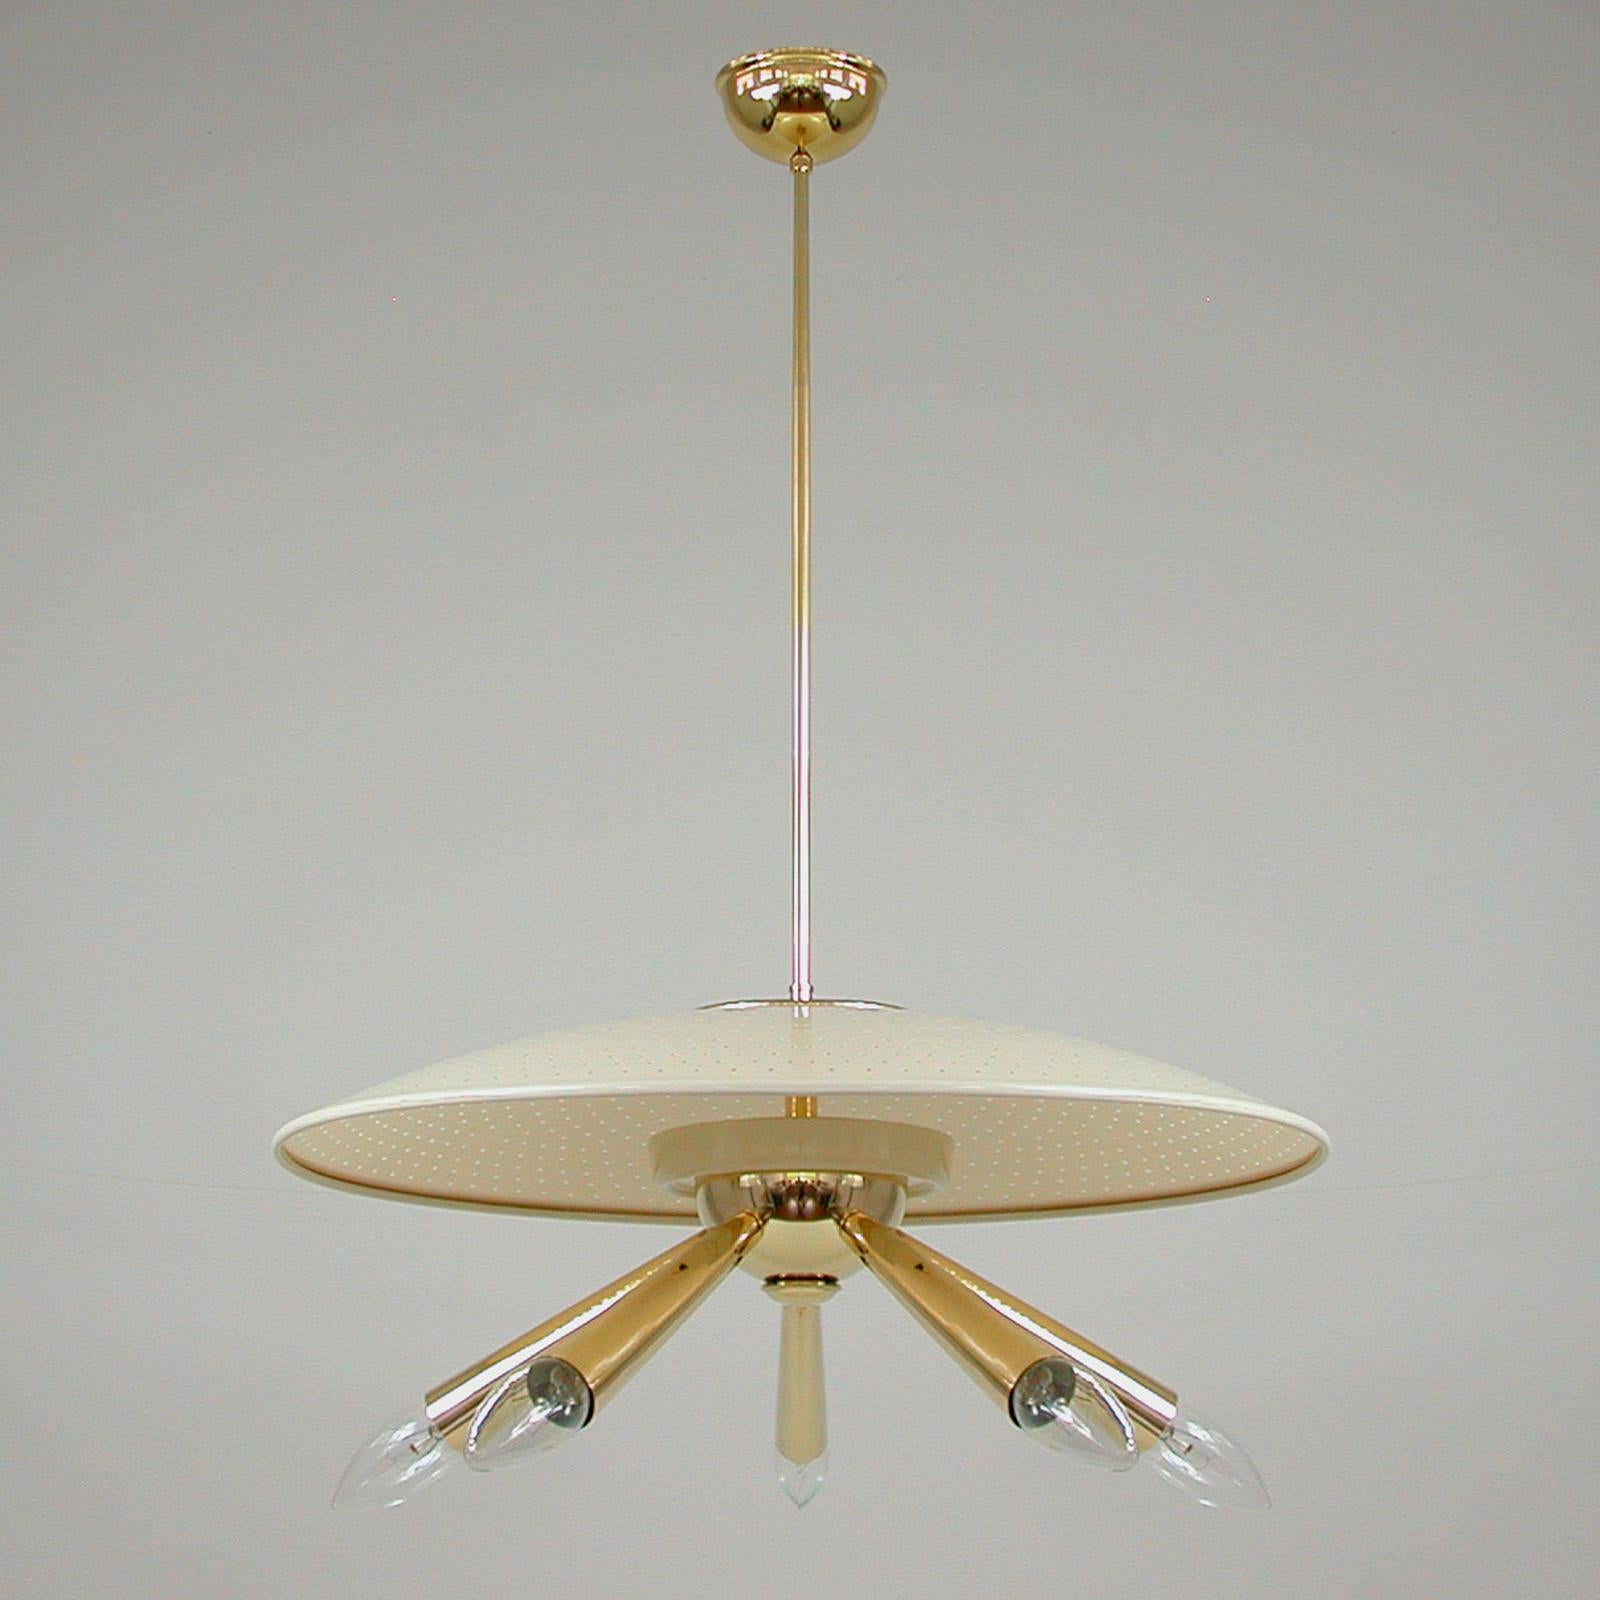 Midcentury Brass Dome 5 Light Pendant, Italy Early 1950s For Sale 6